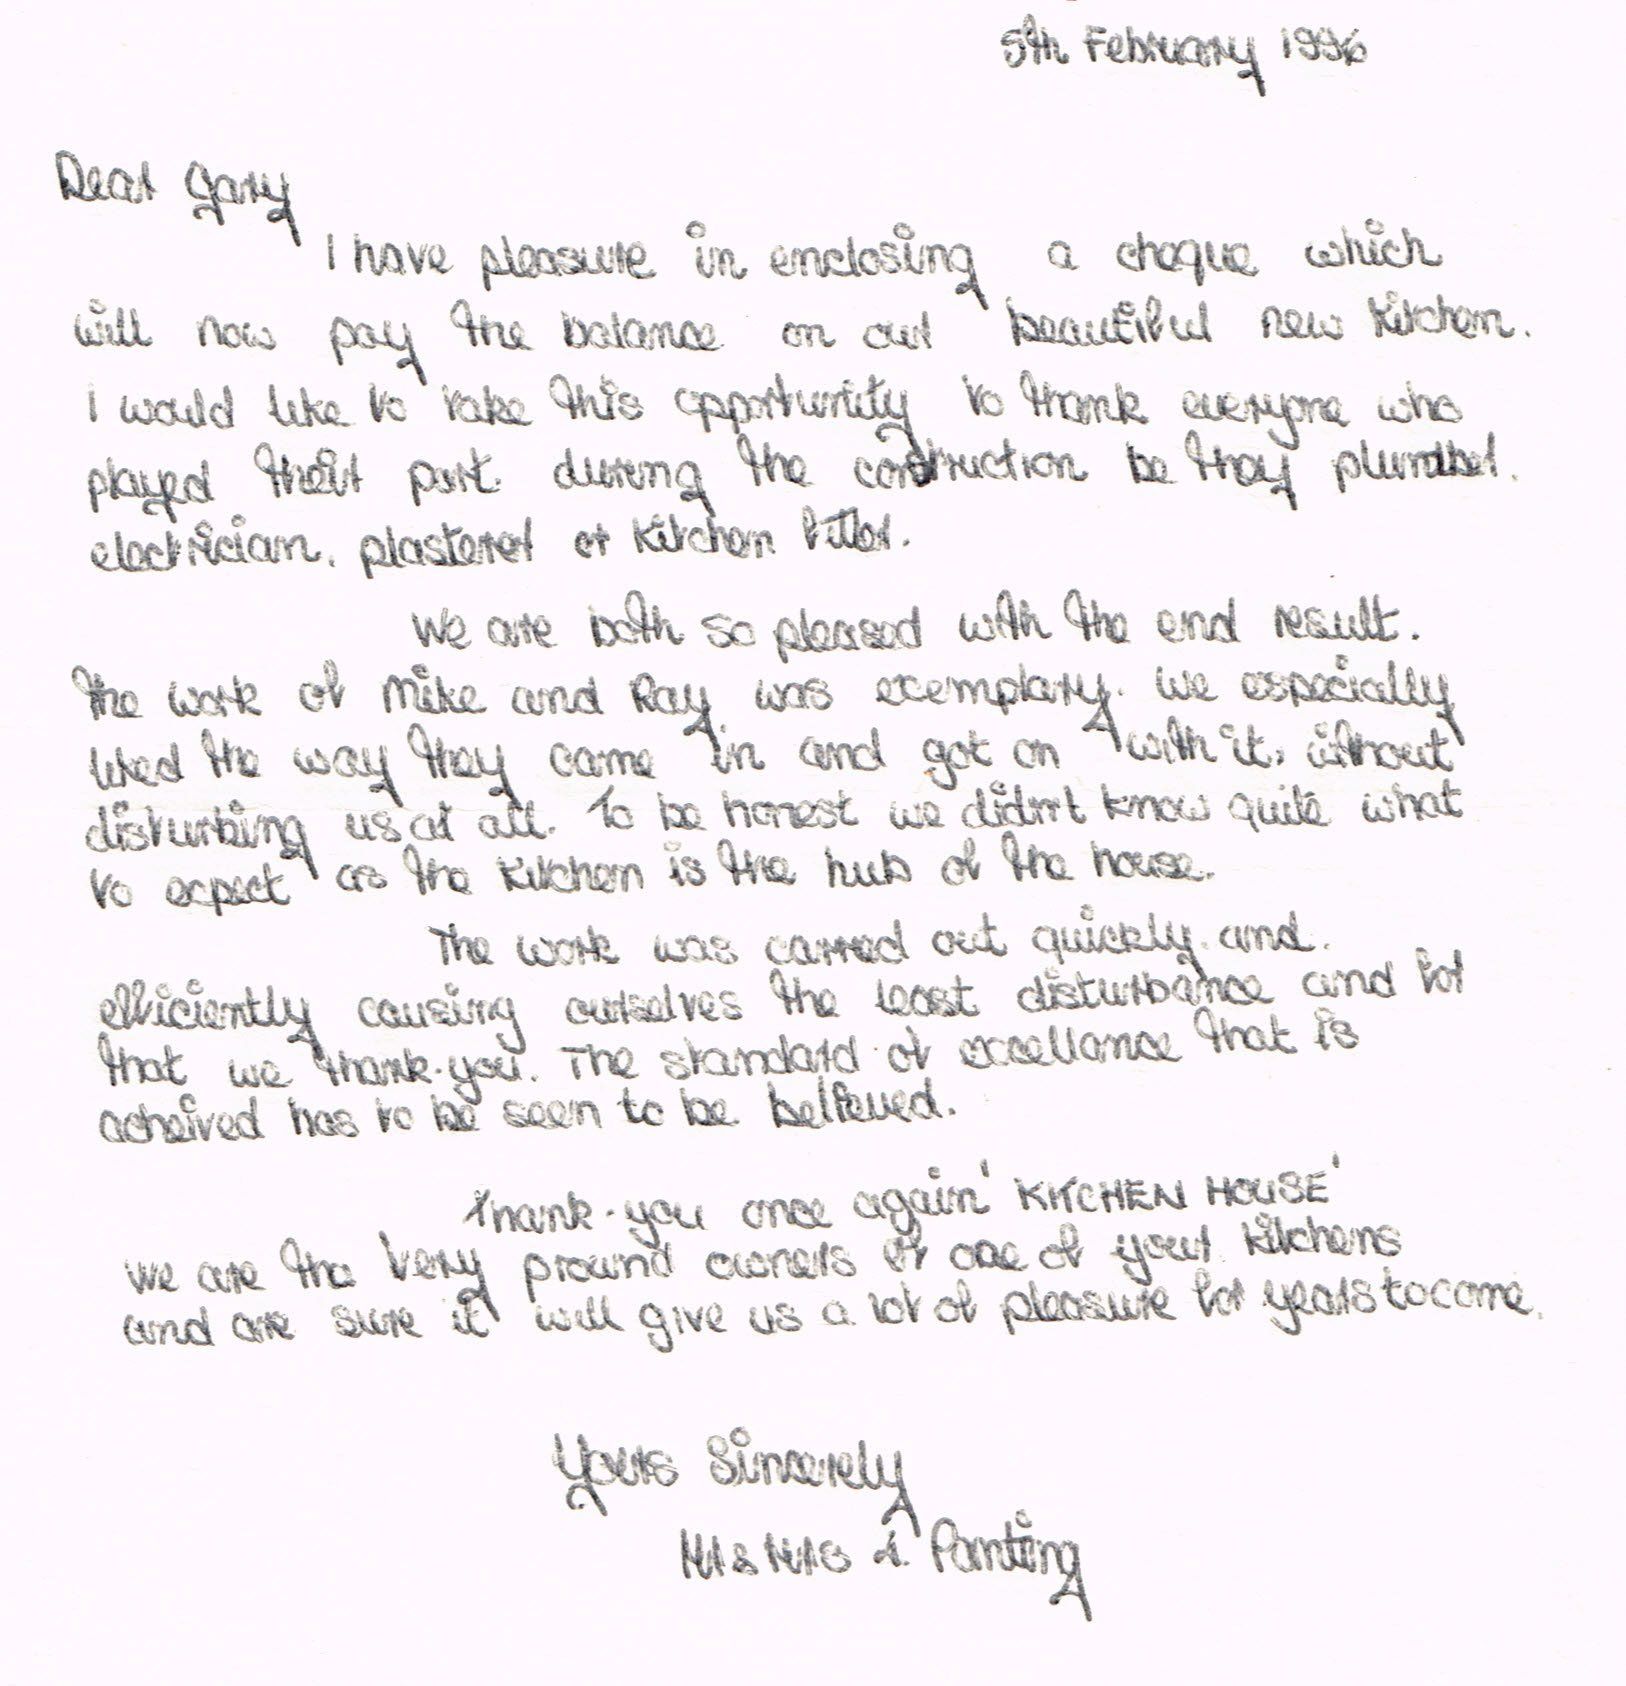 testimonial from Mrs and Mrs Panting in 1996